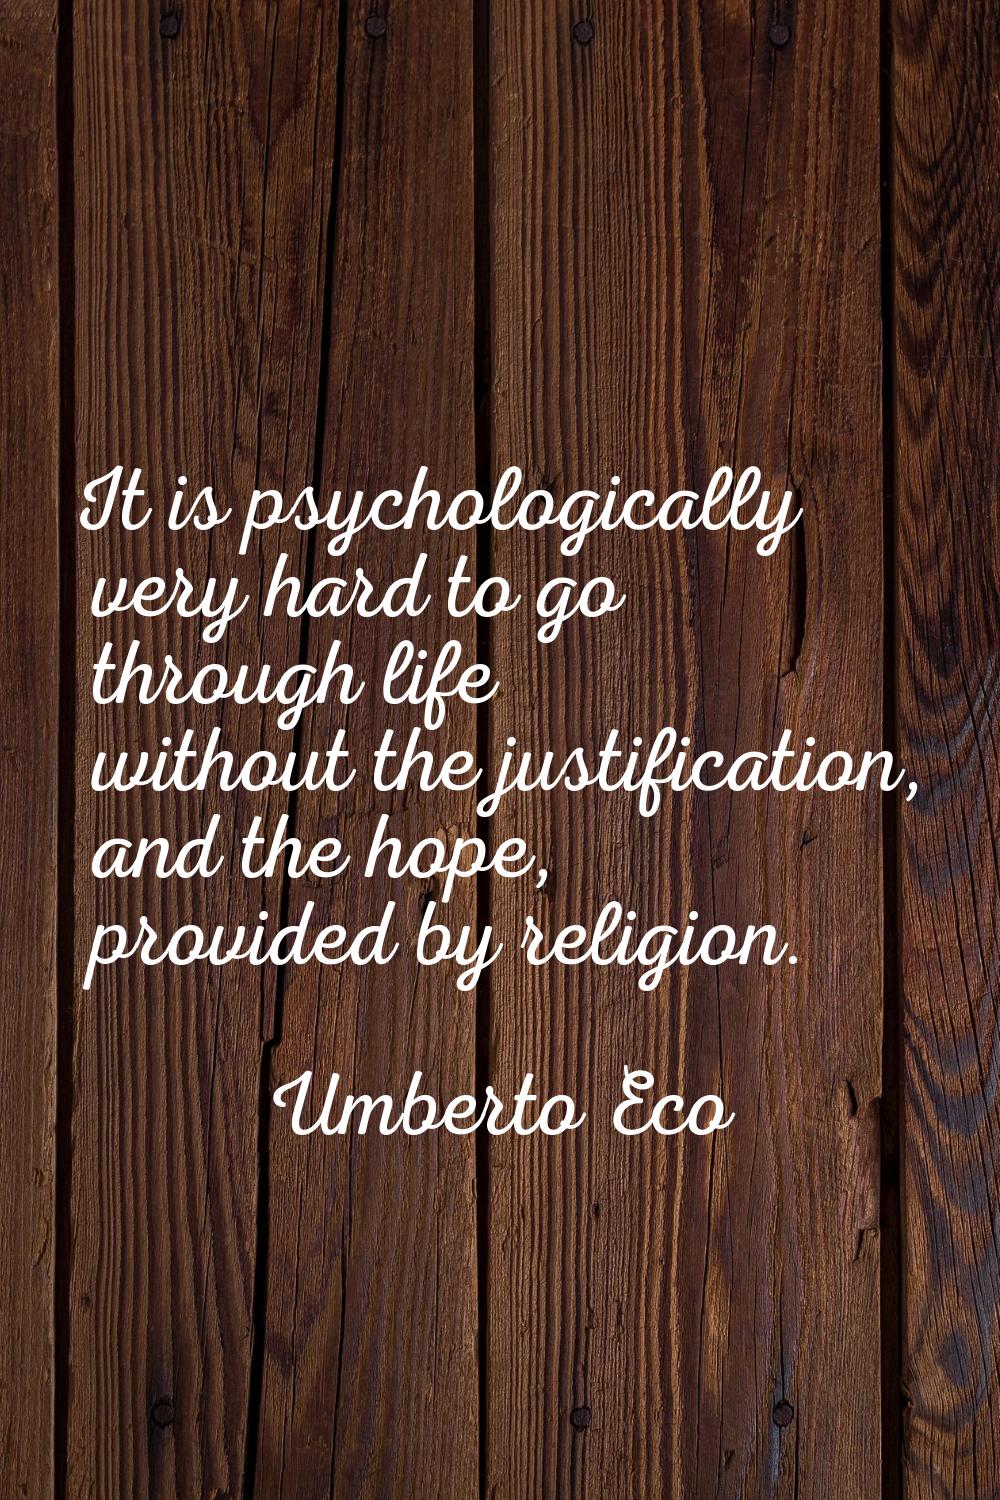 It is psychologically very hard to go through life without the justification, and the hope, provide